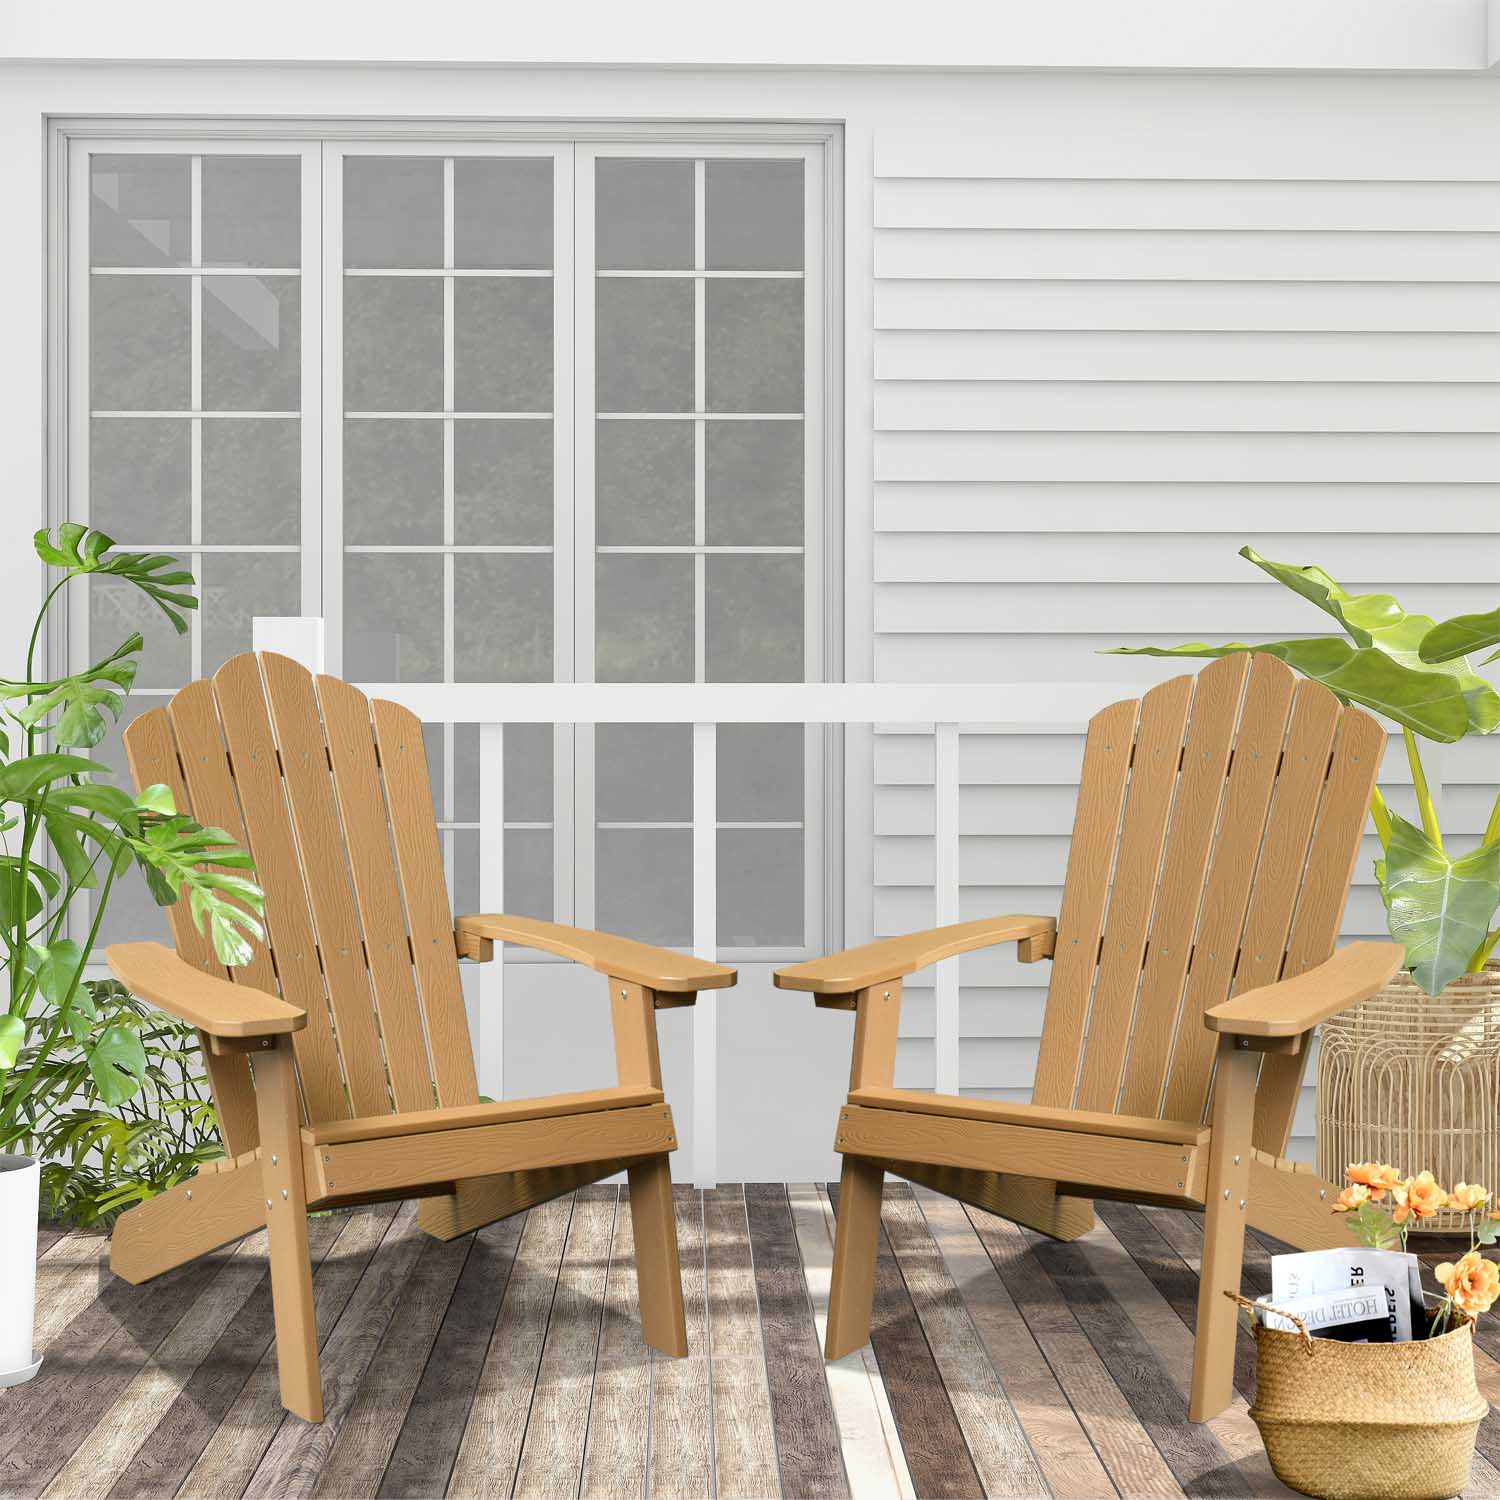 Ovios Outdoor Chairs 2-Piece Adirondack Transitional Style